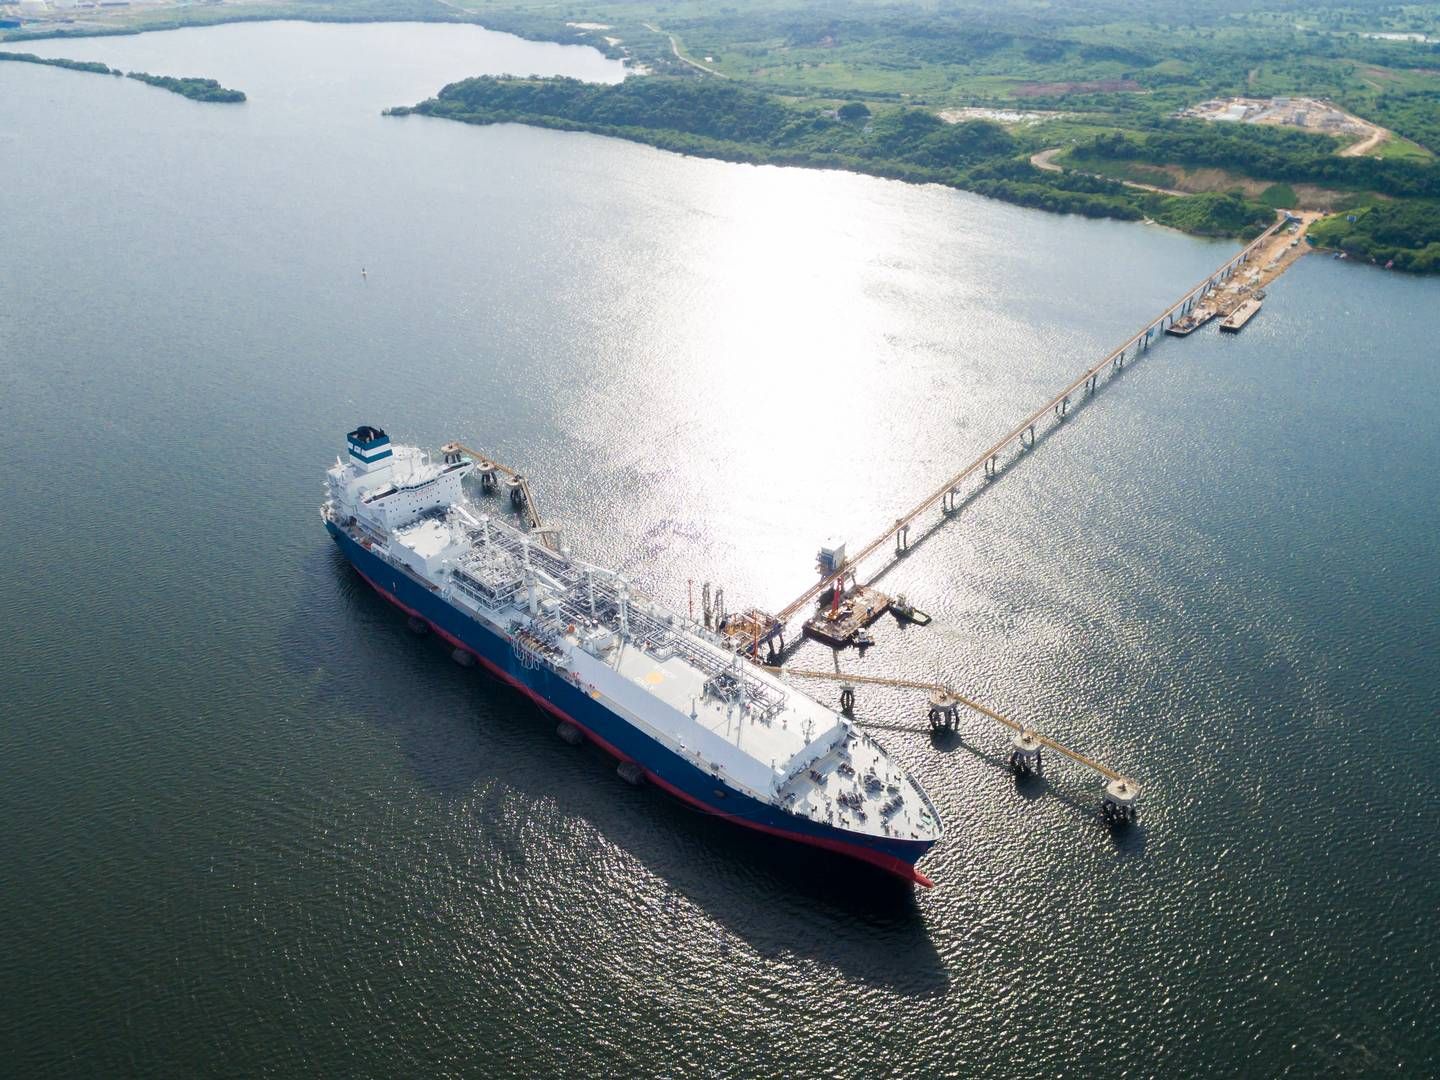 Höeg LNG has developed a so-called ammonia cracker technology used to convert ammonia by splitting it into two elements - nitrogen and hydrogen. | Foto: Höegh LNG